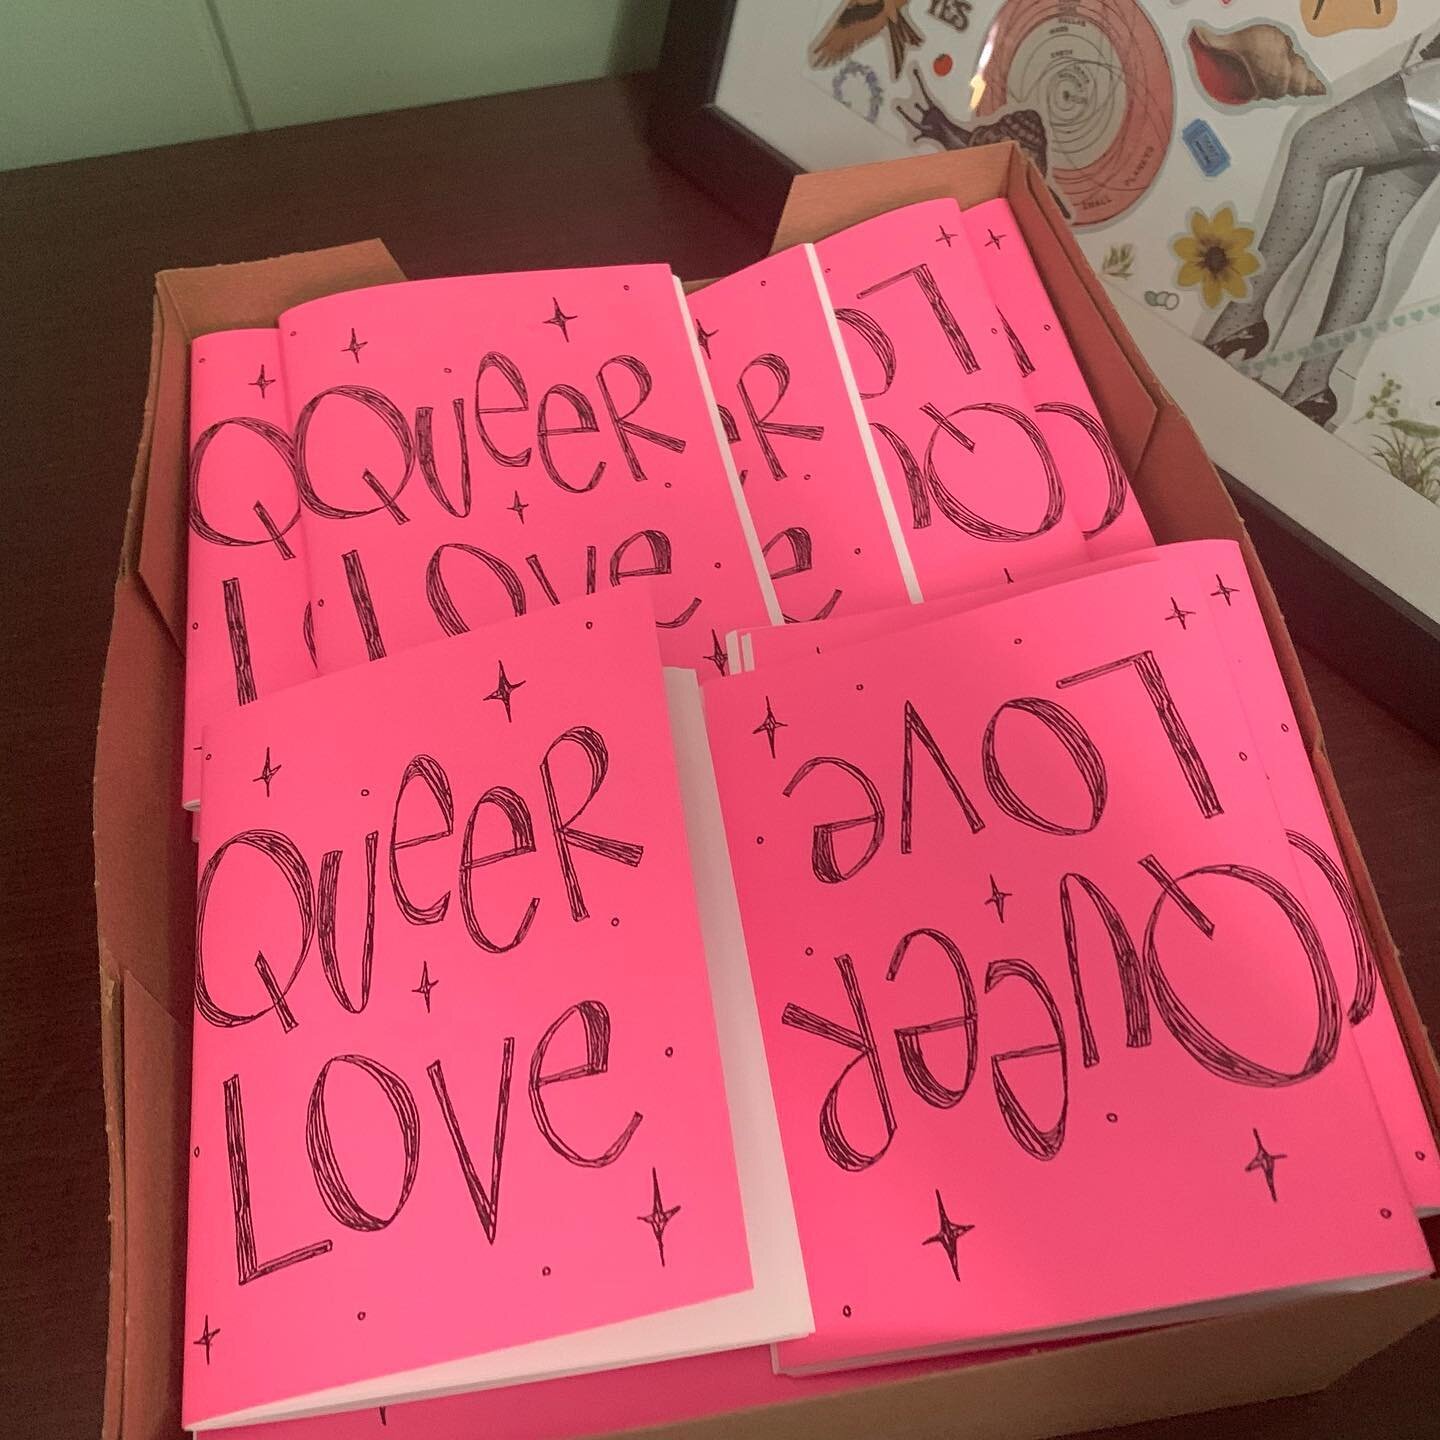 Queer Love, a handmade zine by @sarahciston and yours truly, is on sale now. 

Send one to your sweetie(s) for V-day, and I&rsquo;ll include a handmade valentine (just DM with info). 

Link in stories // can also purchase on my website (link in bio)
